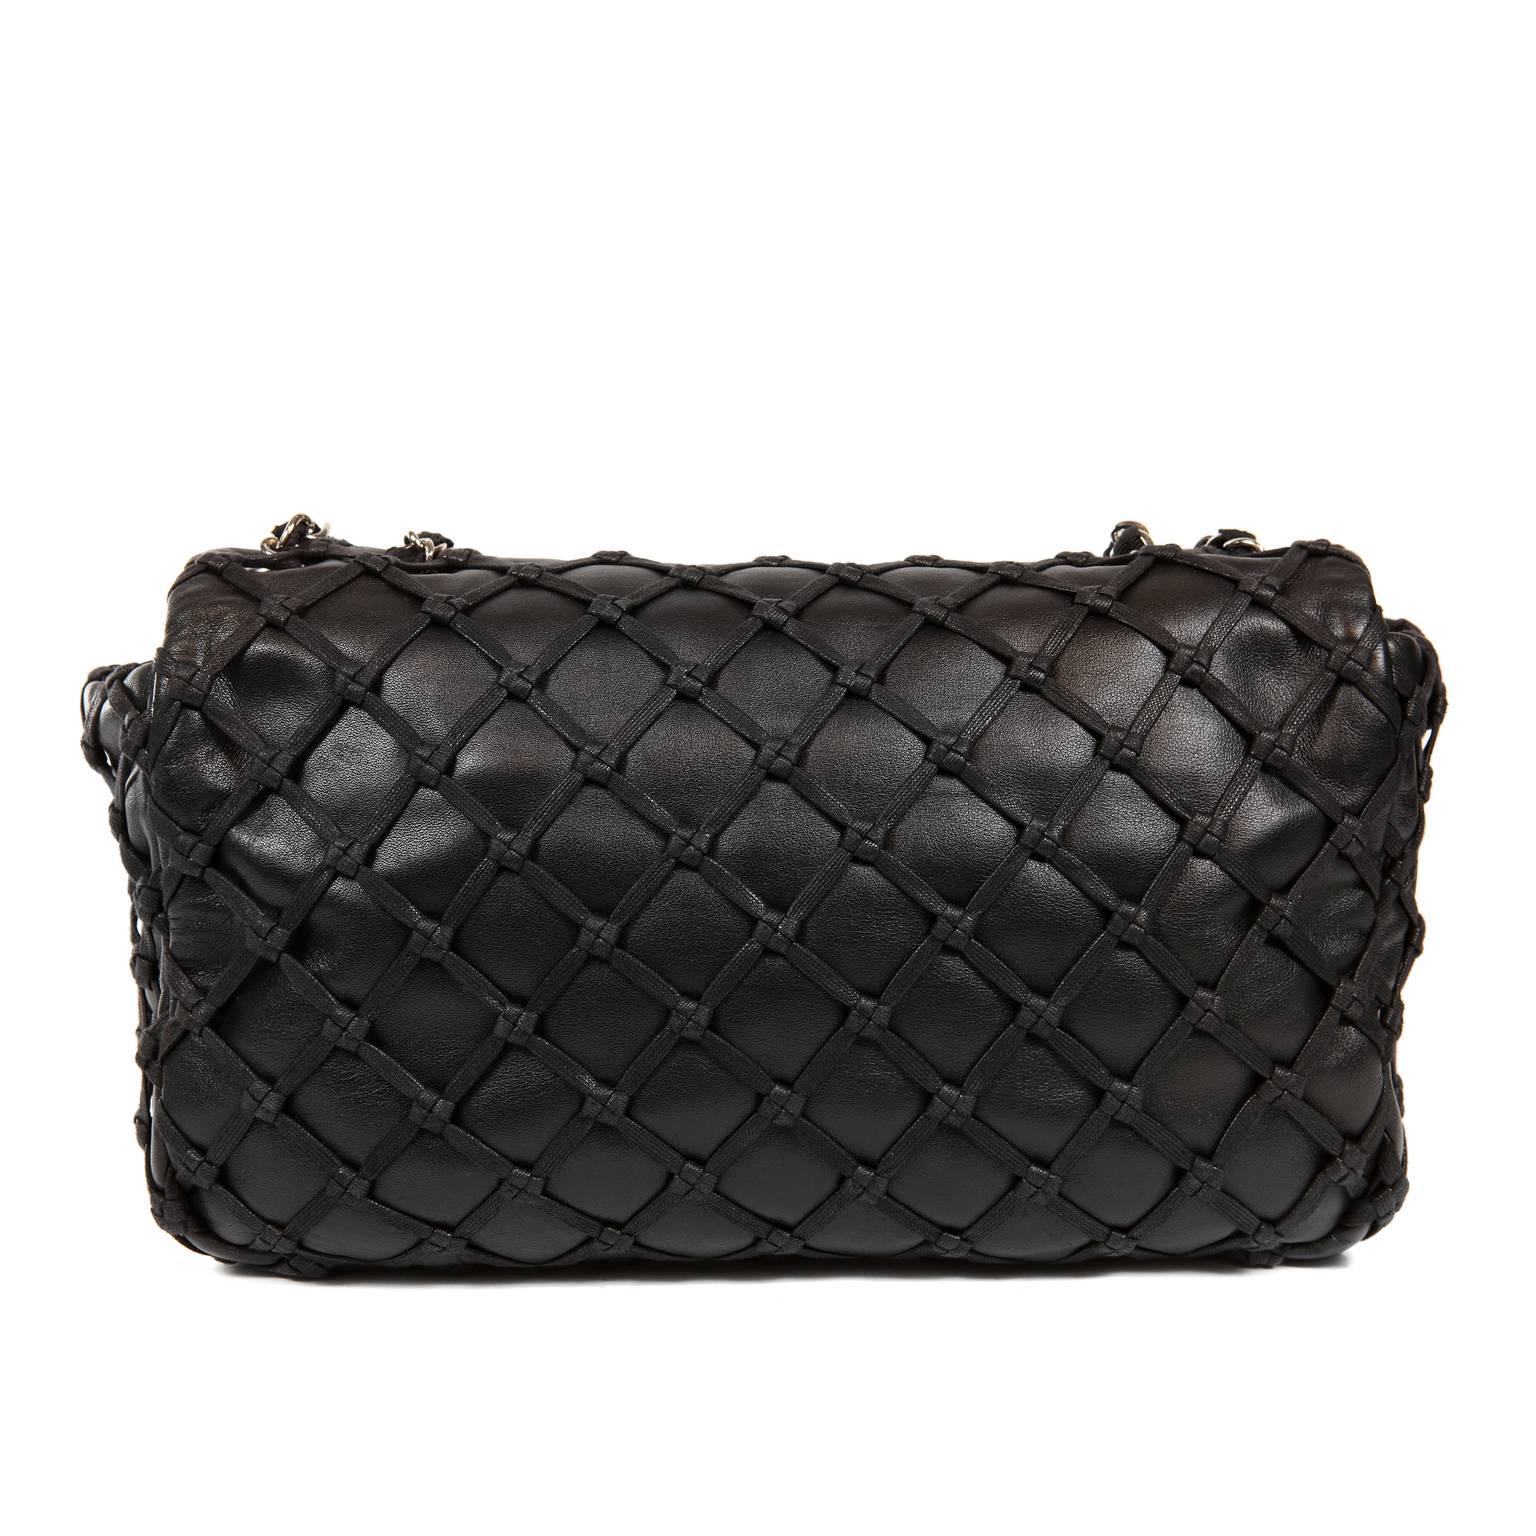 Chanel Black Leather Woven Top Stitch Classic Flap Bag- Excellent Condition
A unique take on the Classic Flap, this pretty bag features woven top stitching with subtle love knot details. Black leather with silver interlocking CC twist lock on single